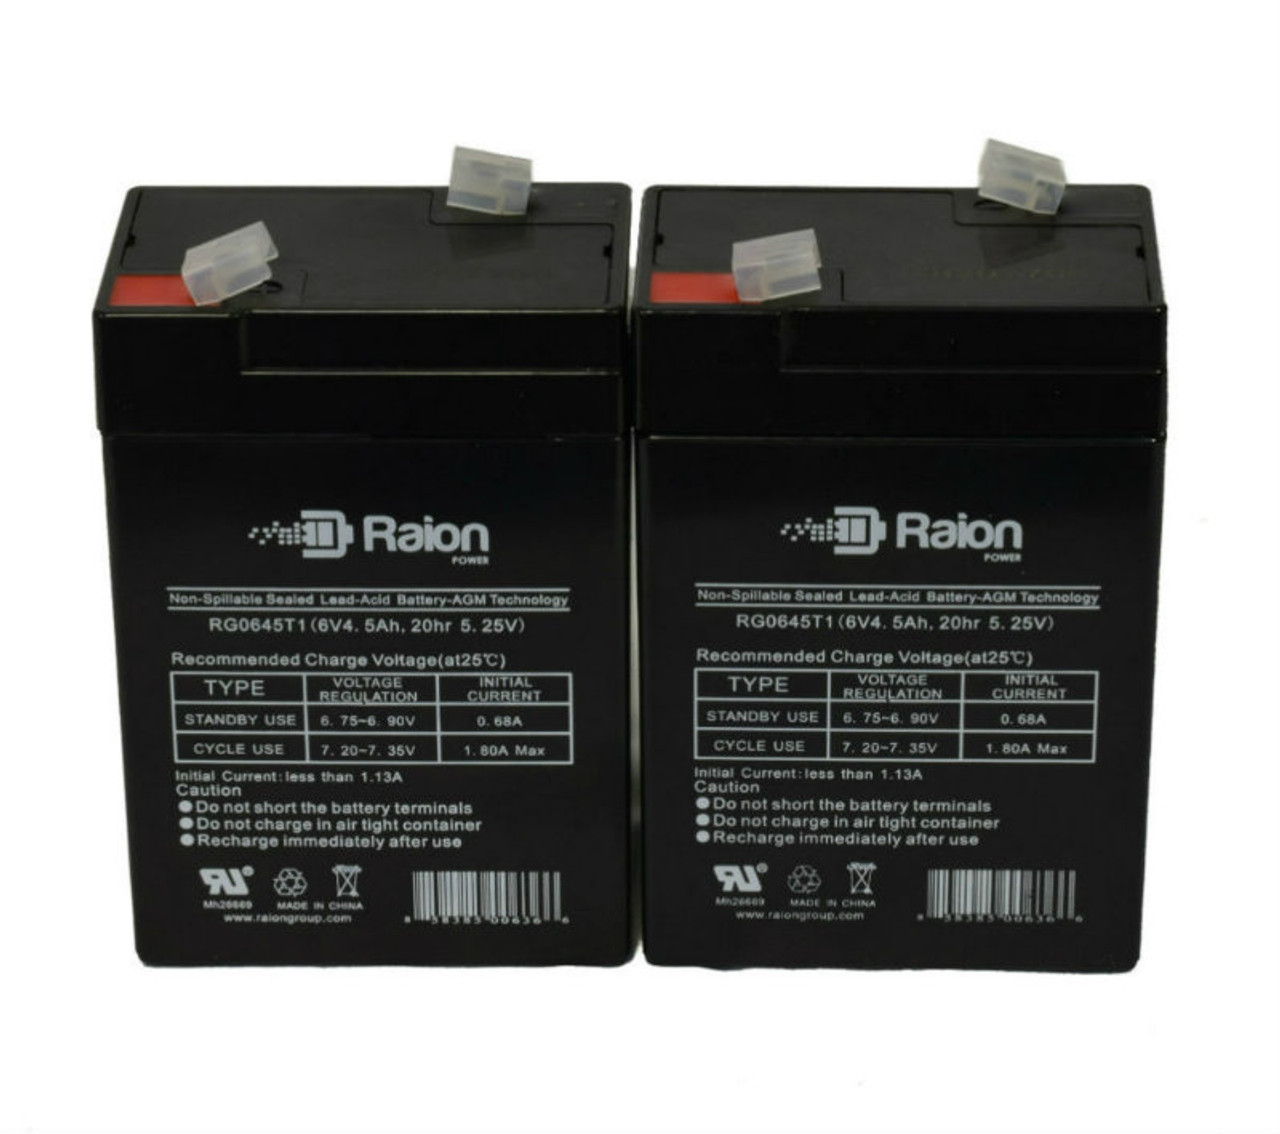 Raion Power 6V 4.5Ah Replacement Emergency Light Battery for Light Alarms 5E15AA - 2 Pack